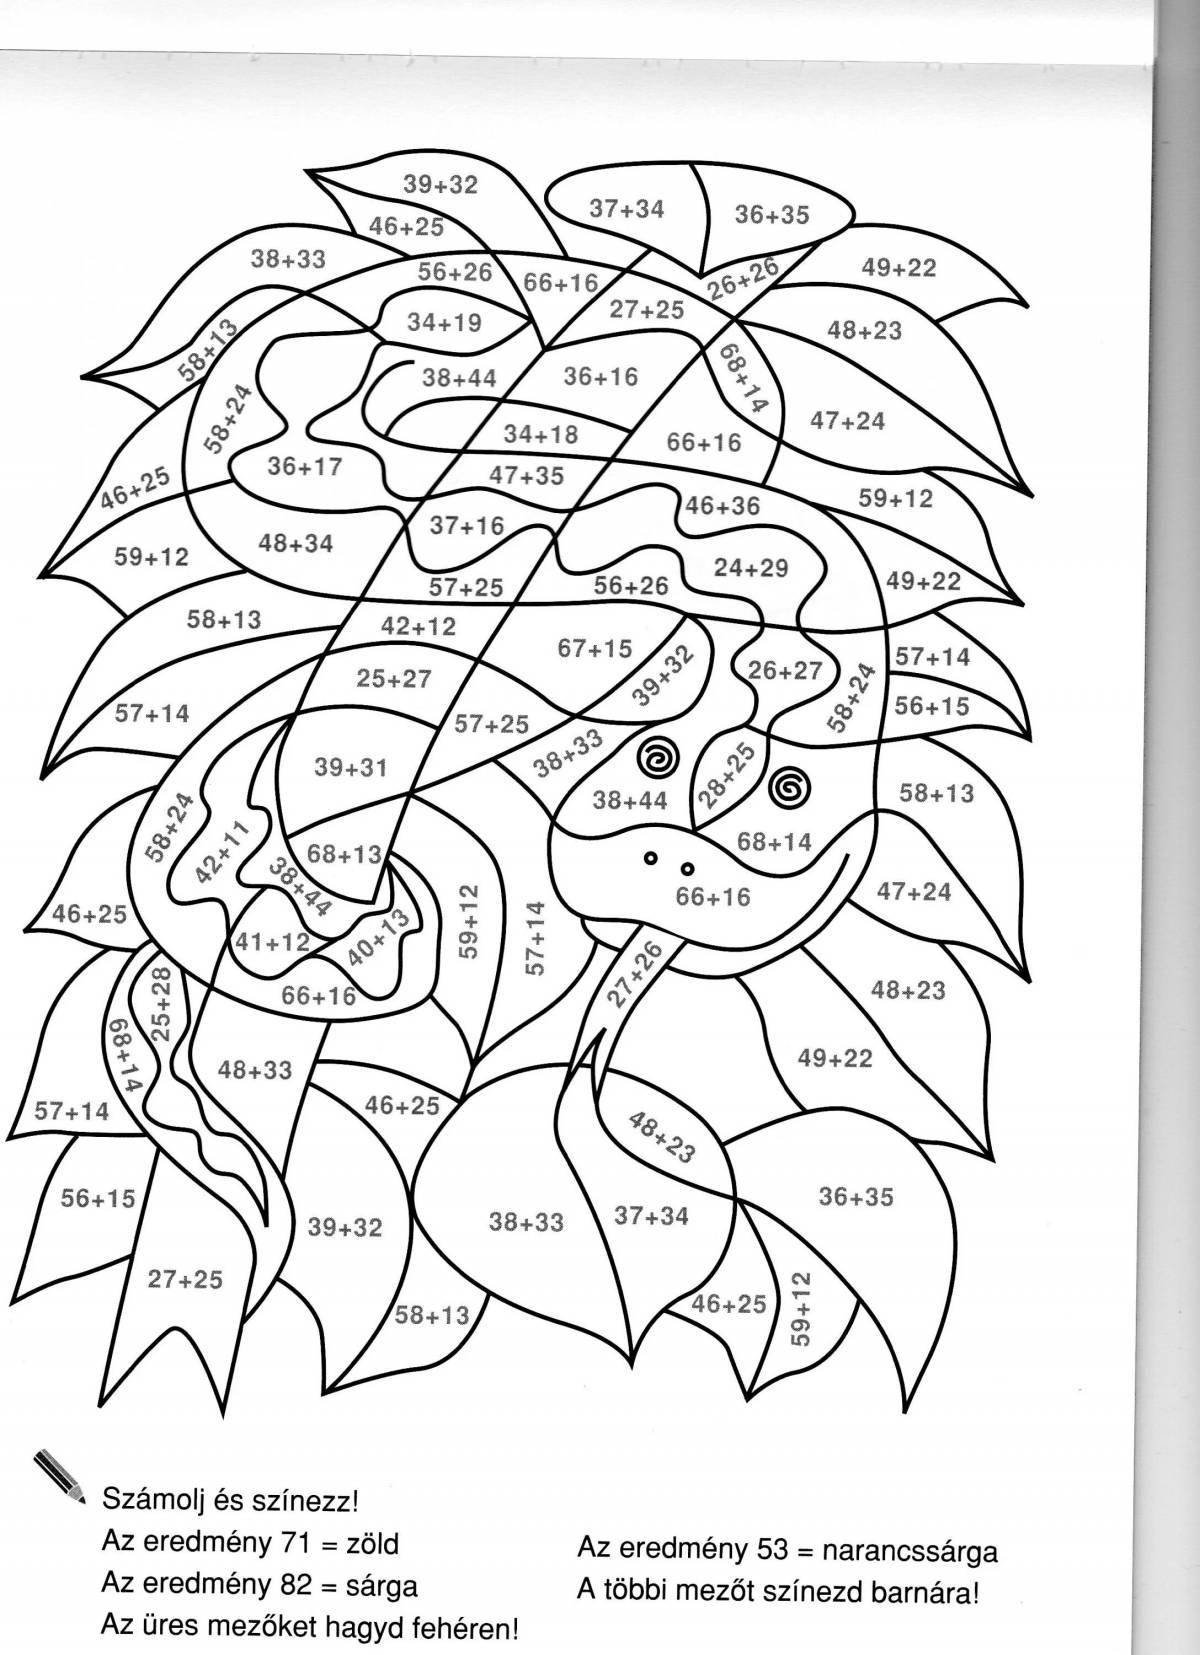 Coloring book for 4th grade math